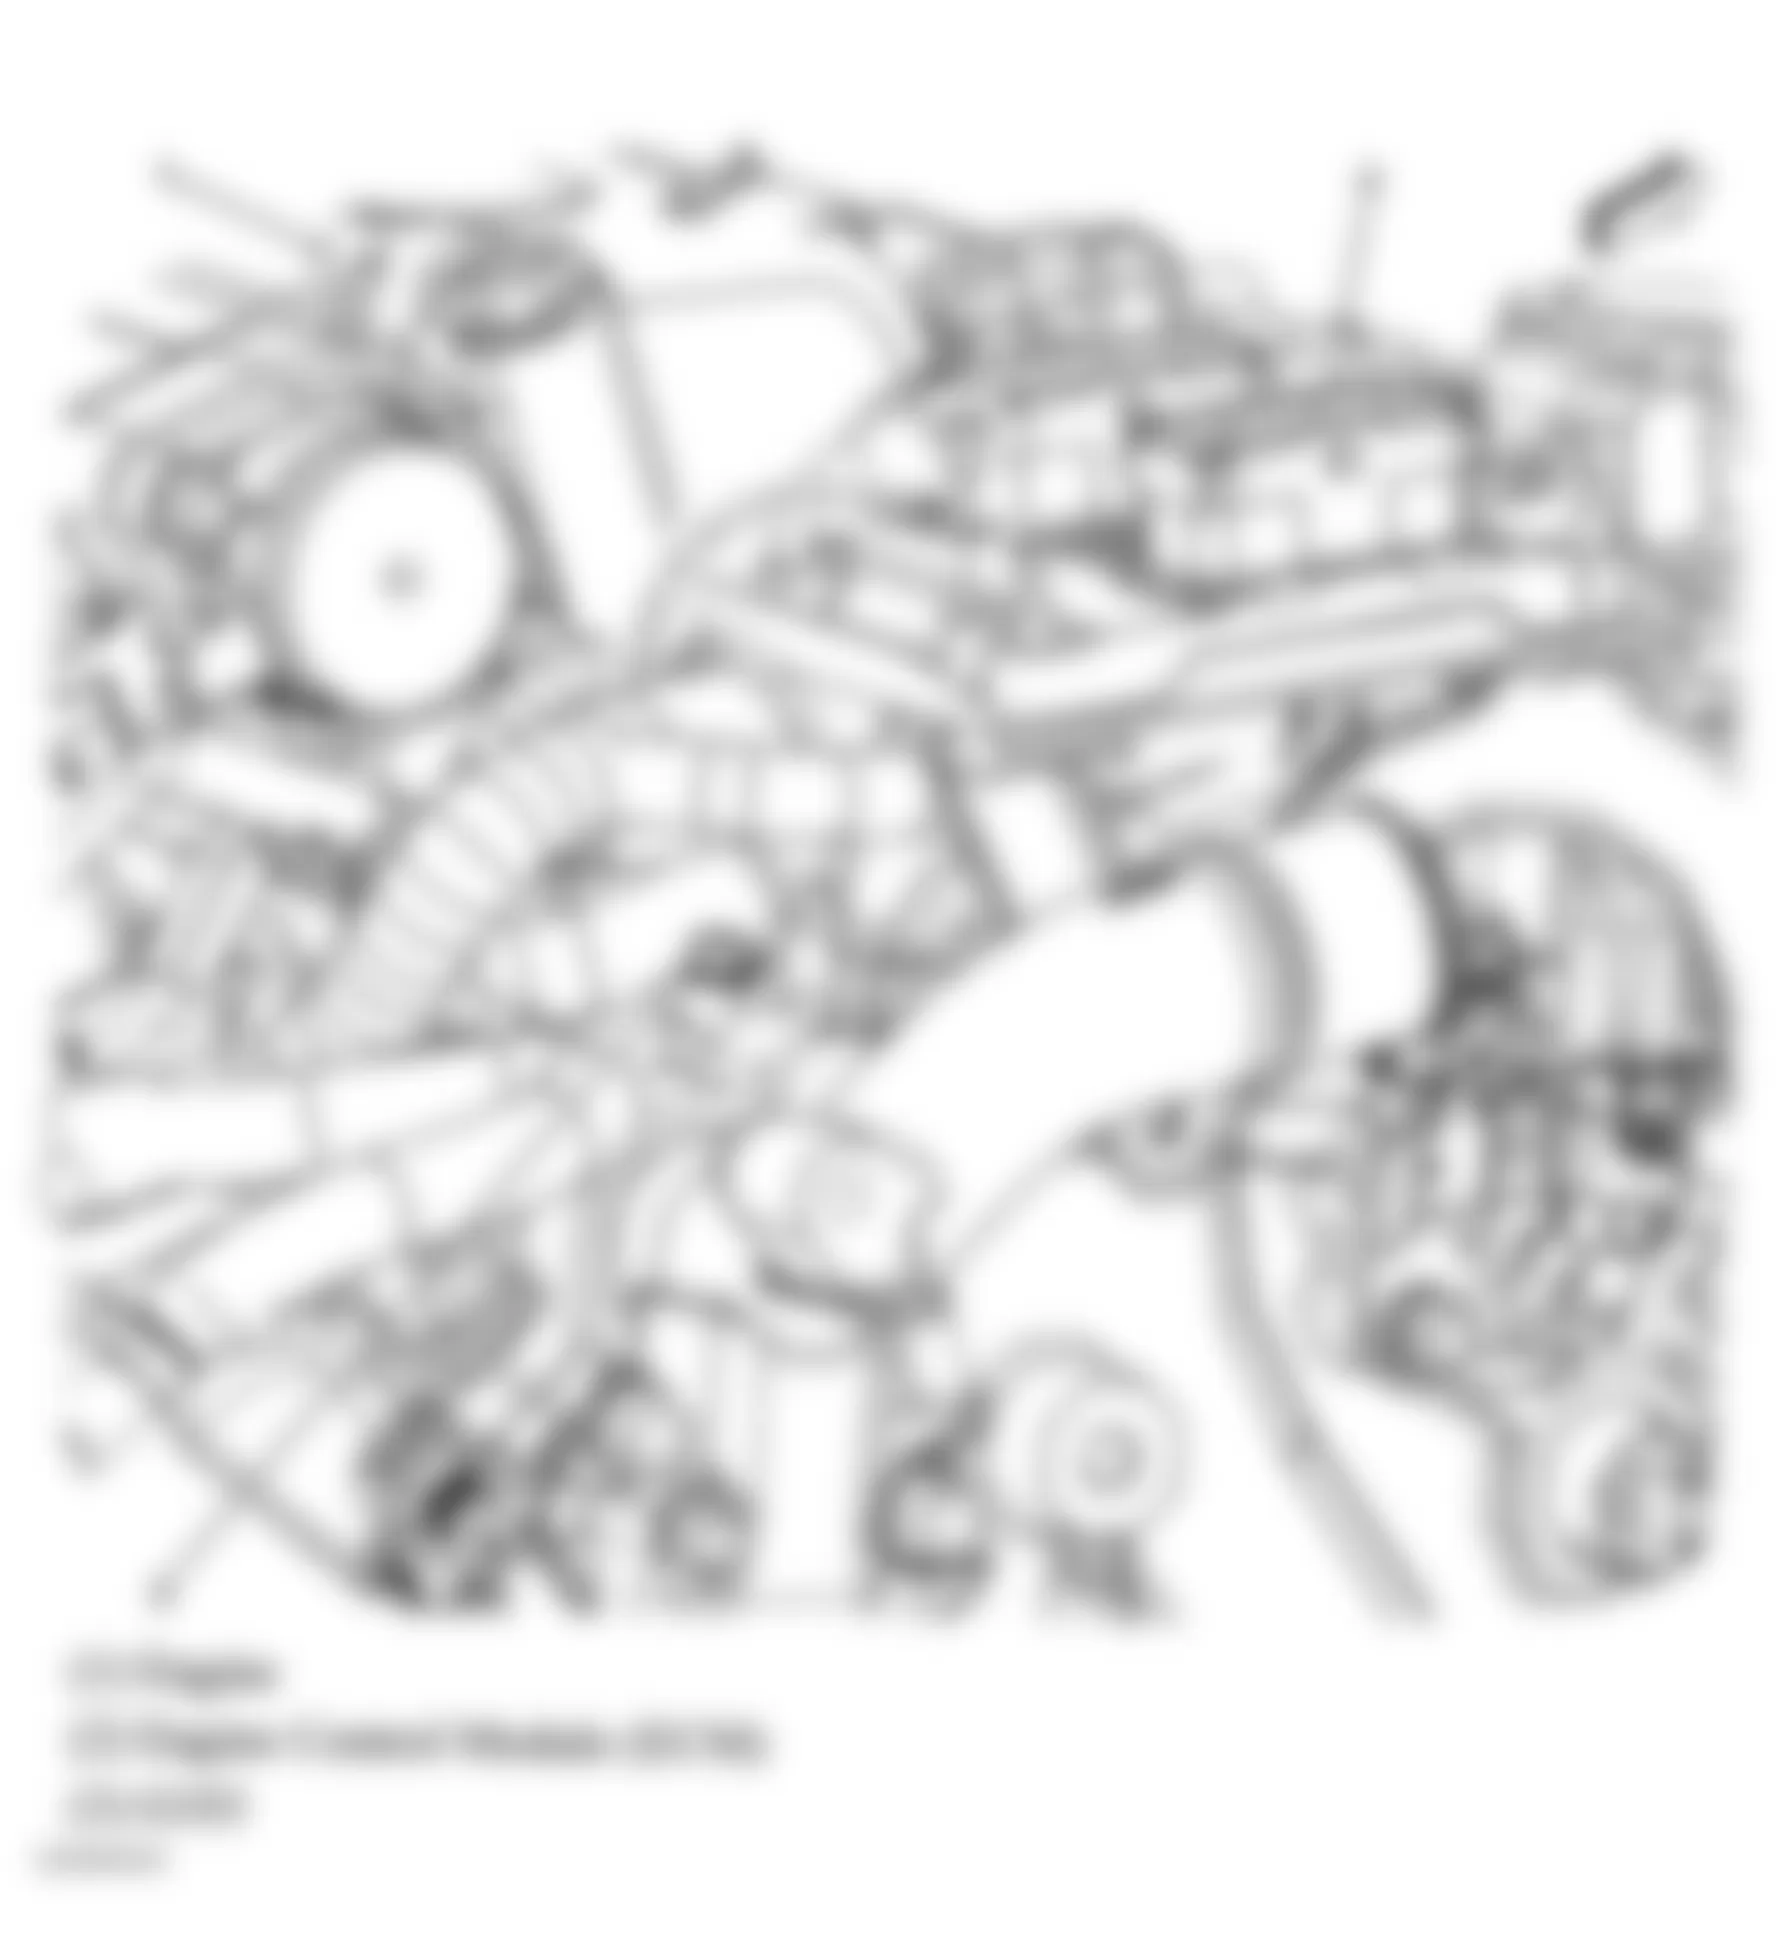 Buick Allure CXS 2006 - Component Locations -  Engine Assembly (3.6L)